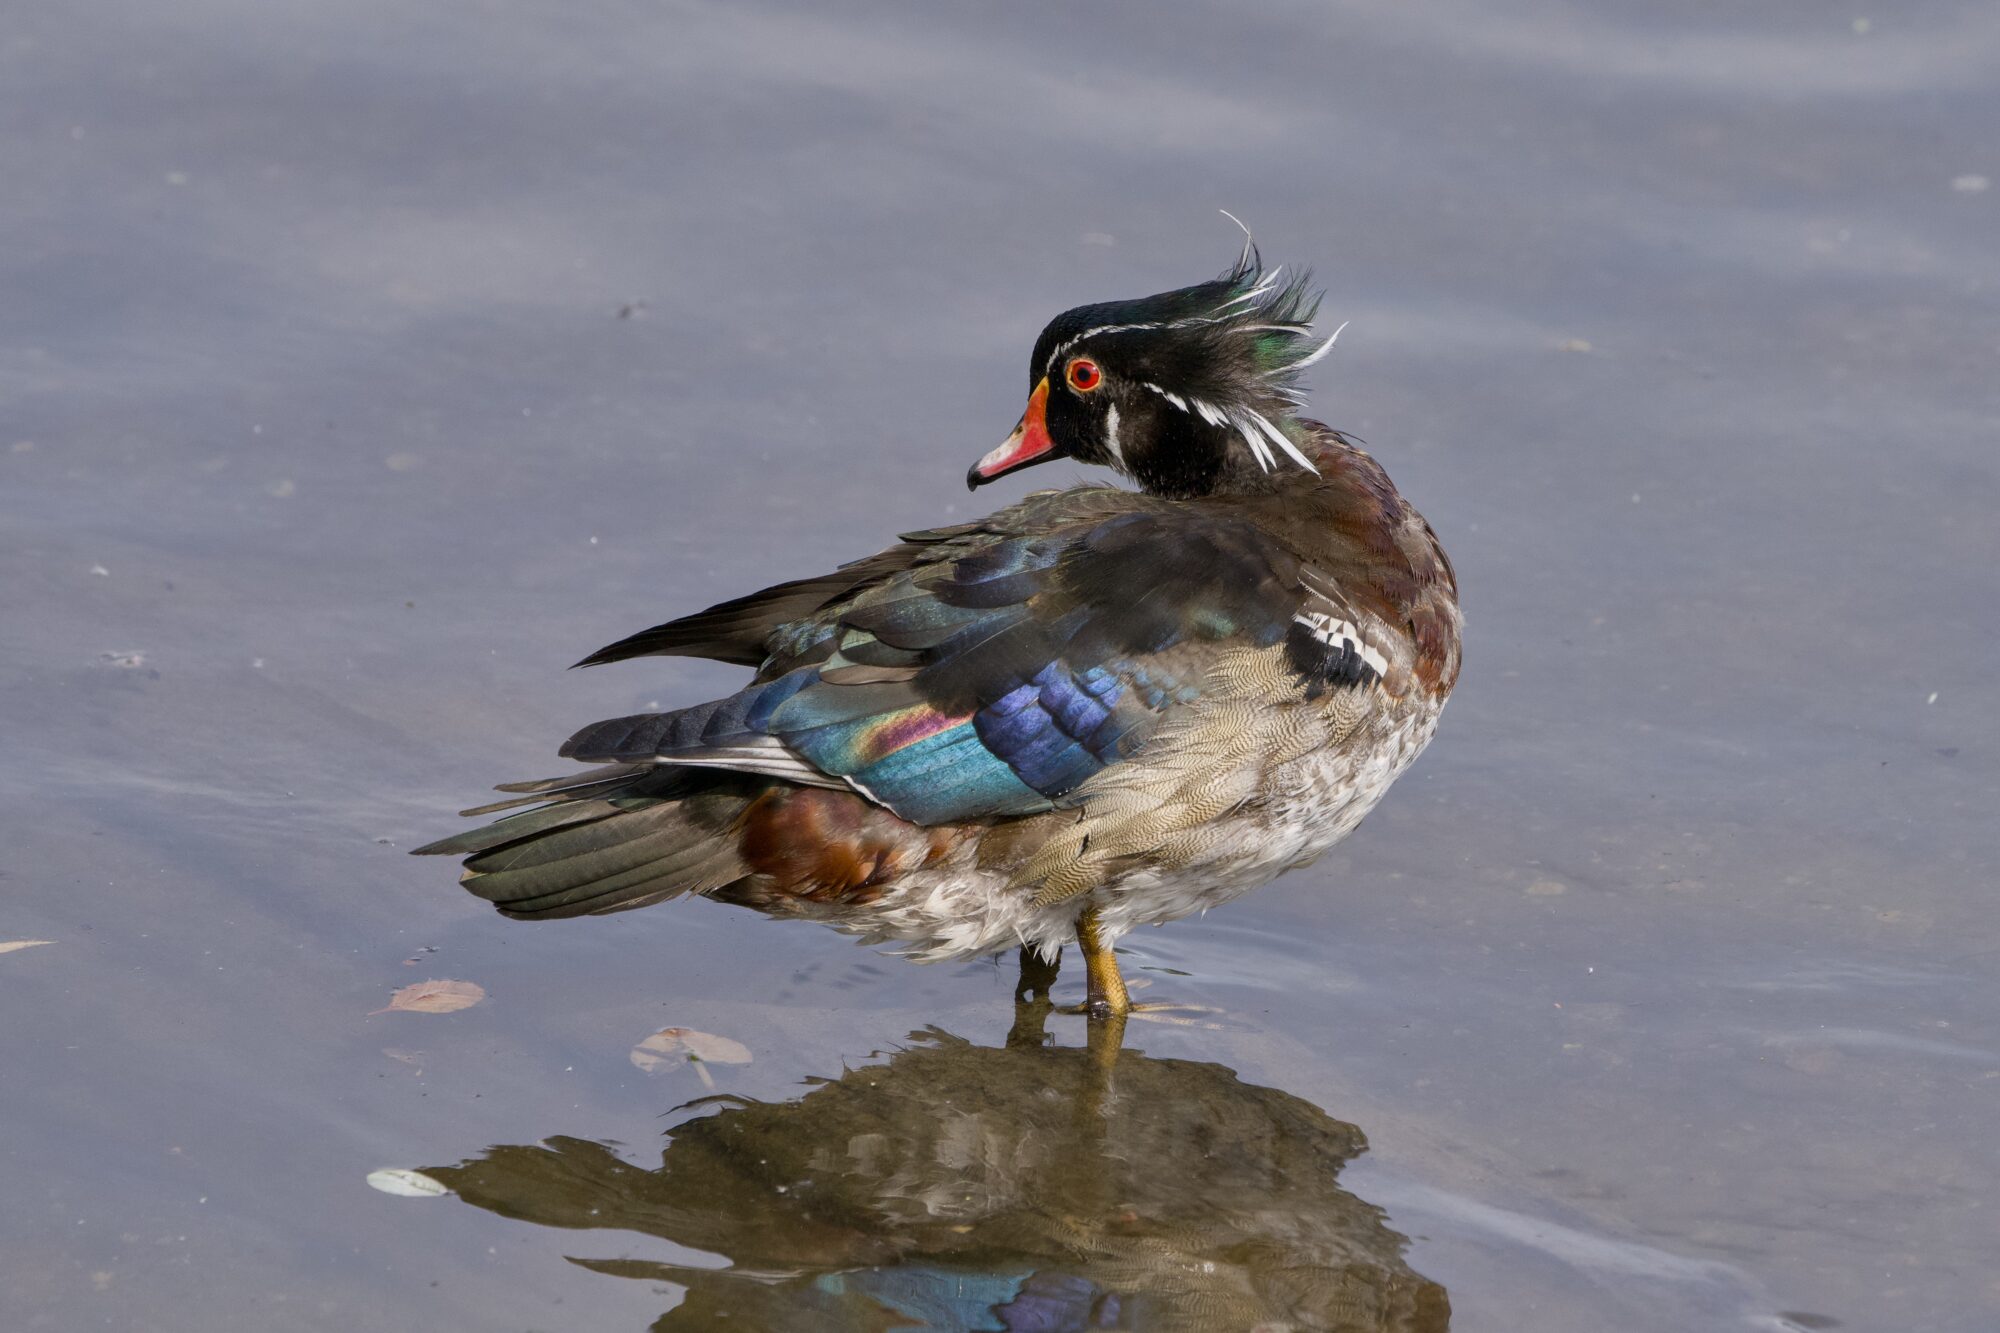 A male Wood Duck is standing in shallow water, looking disheveled in the wind